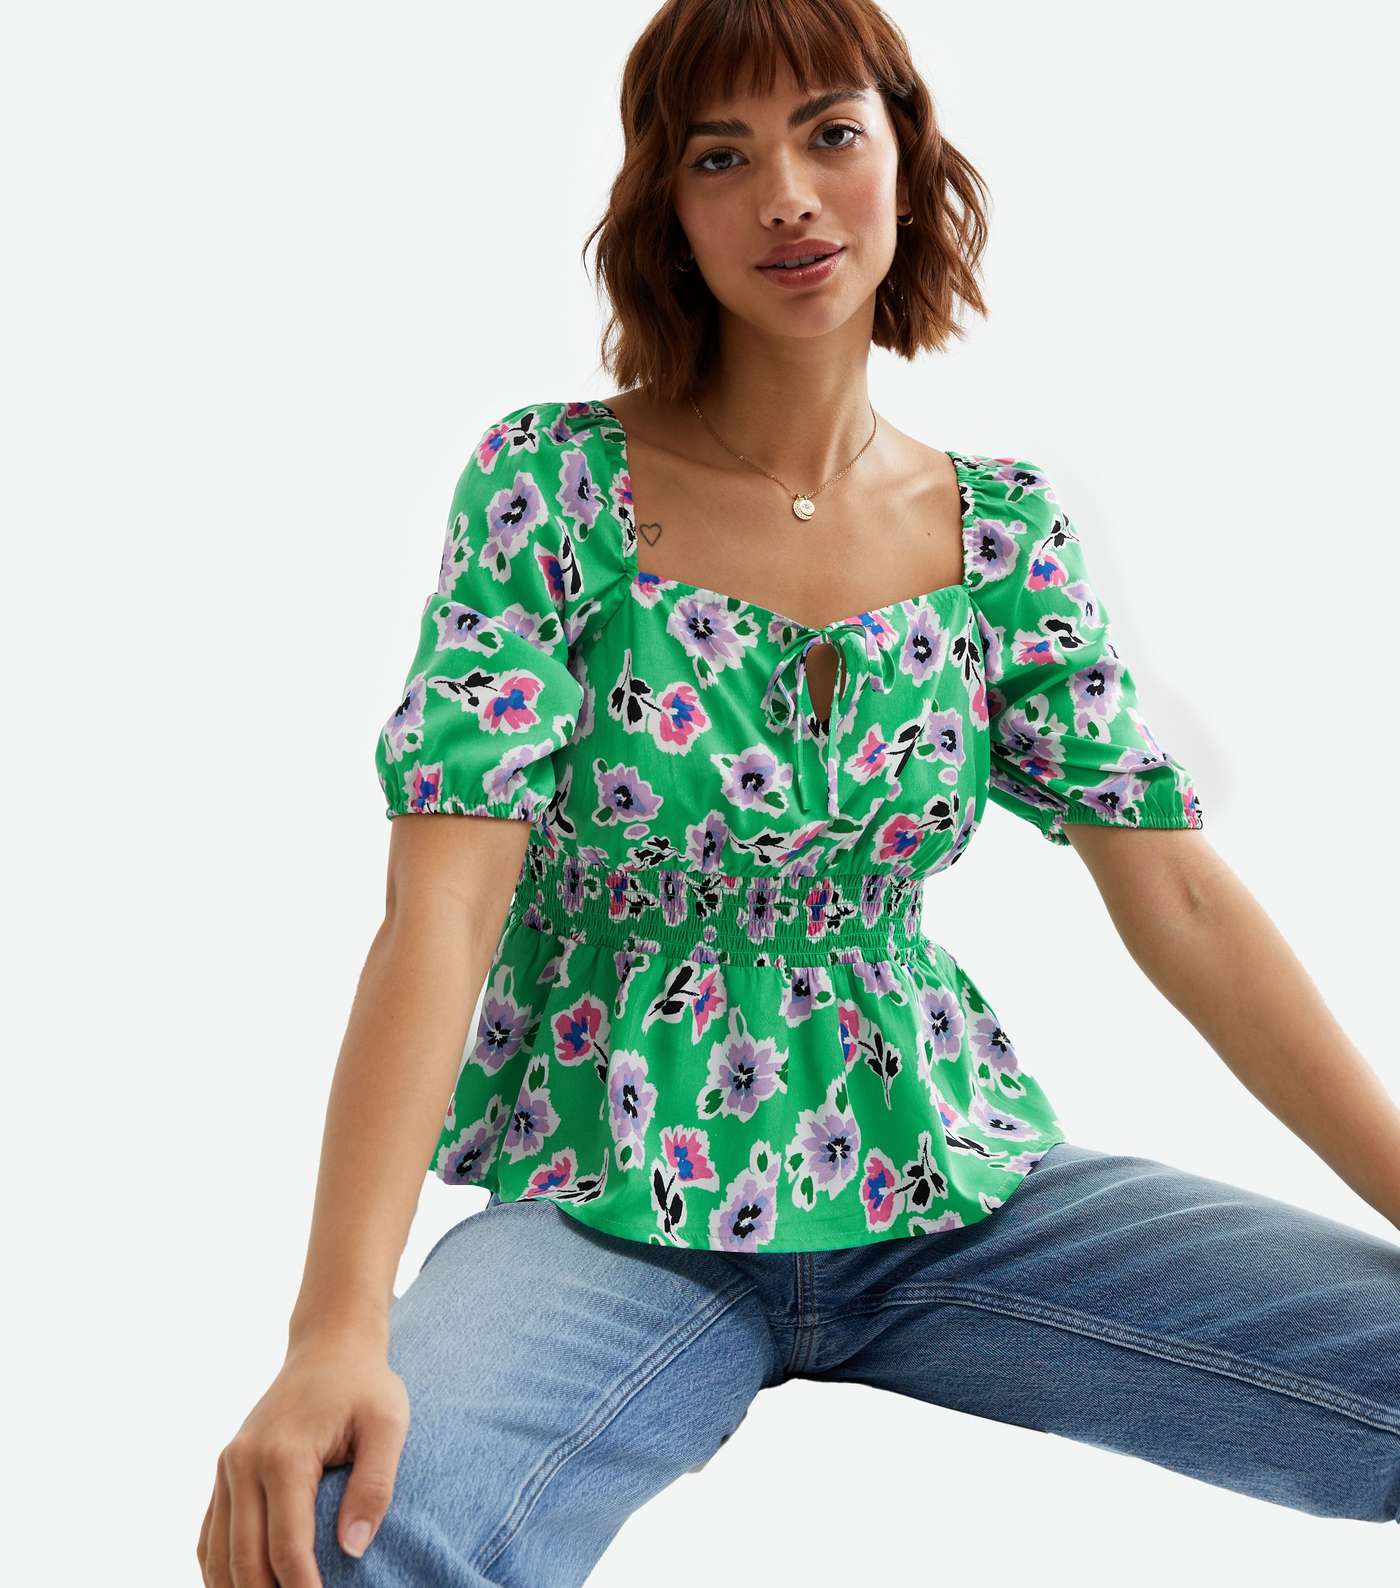 Green Floral Square Neck Peplum Blouse